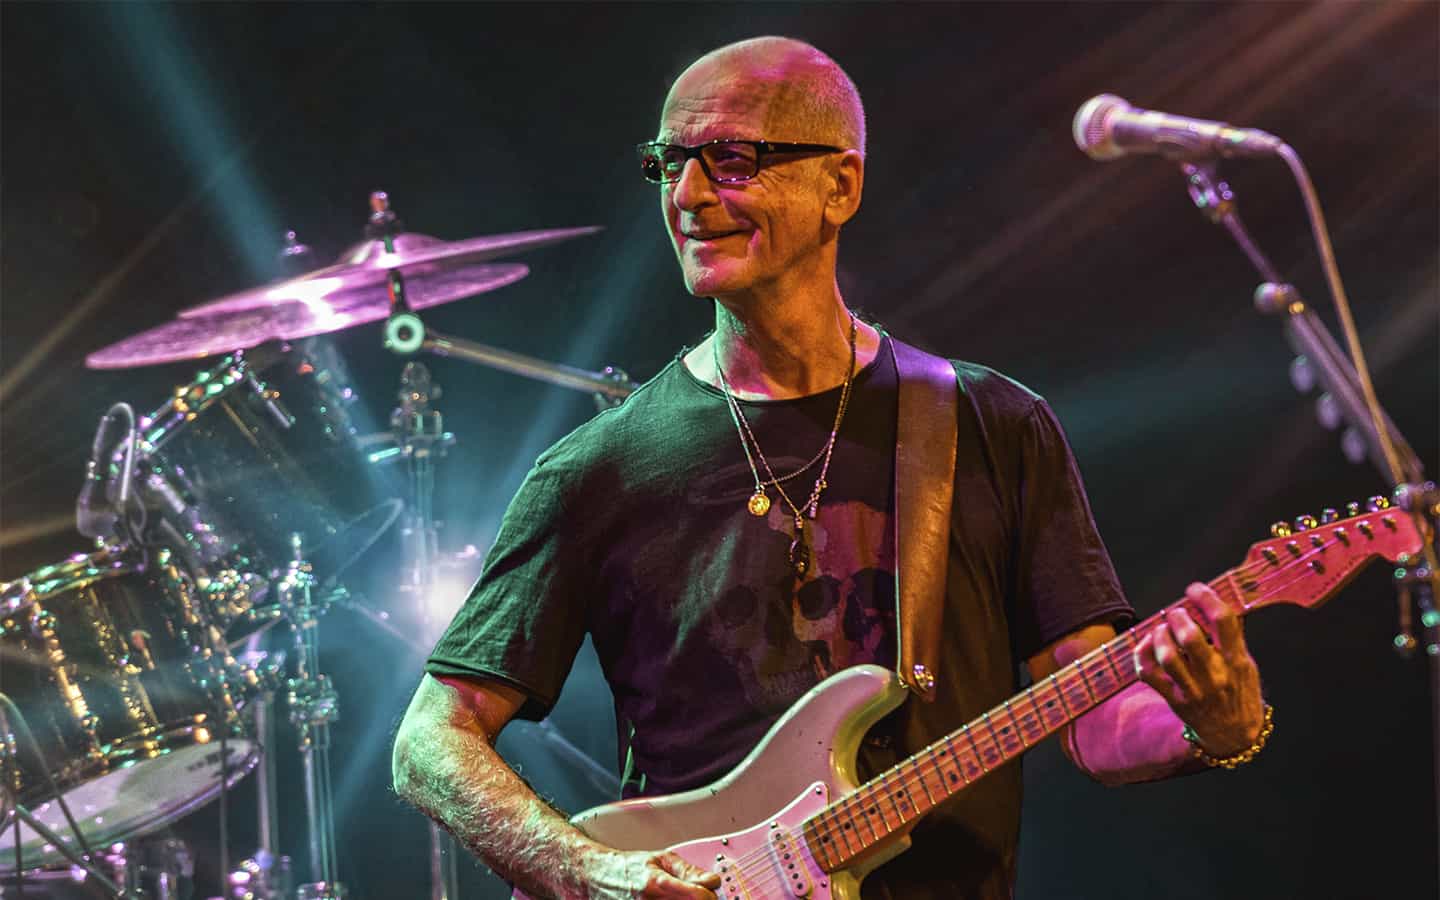 Kim Mitchell finds wishes can come true